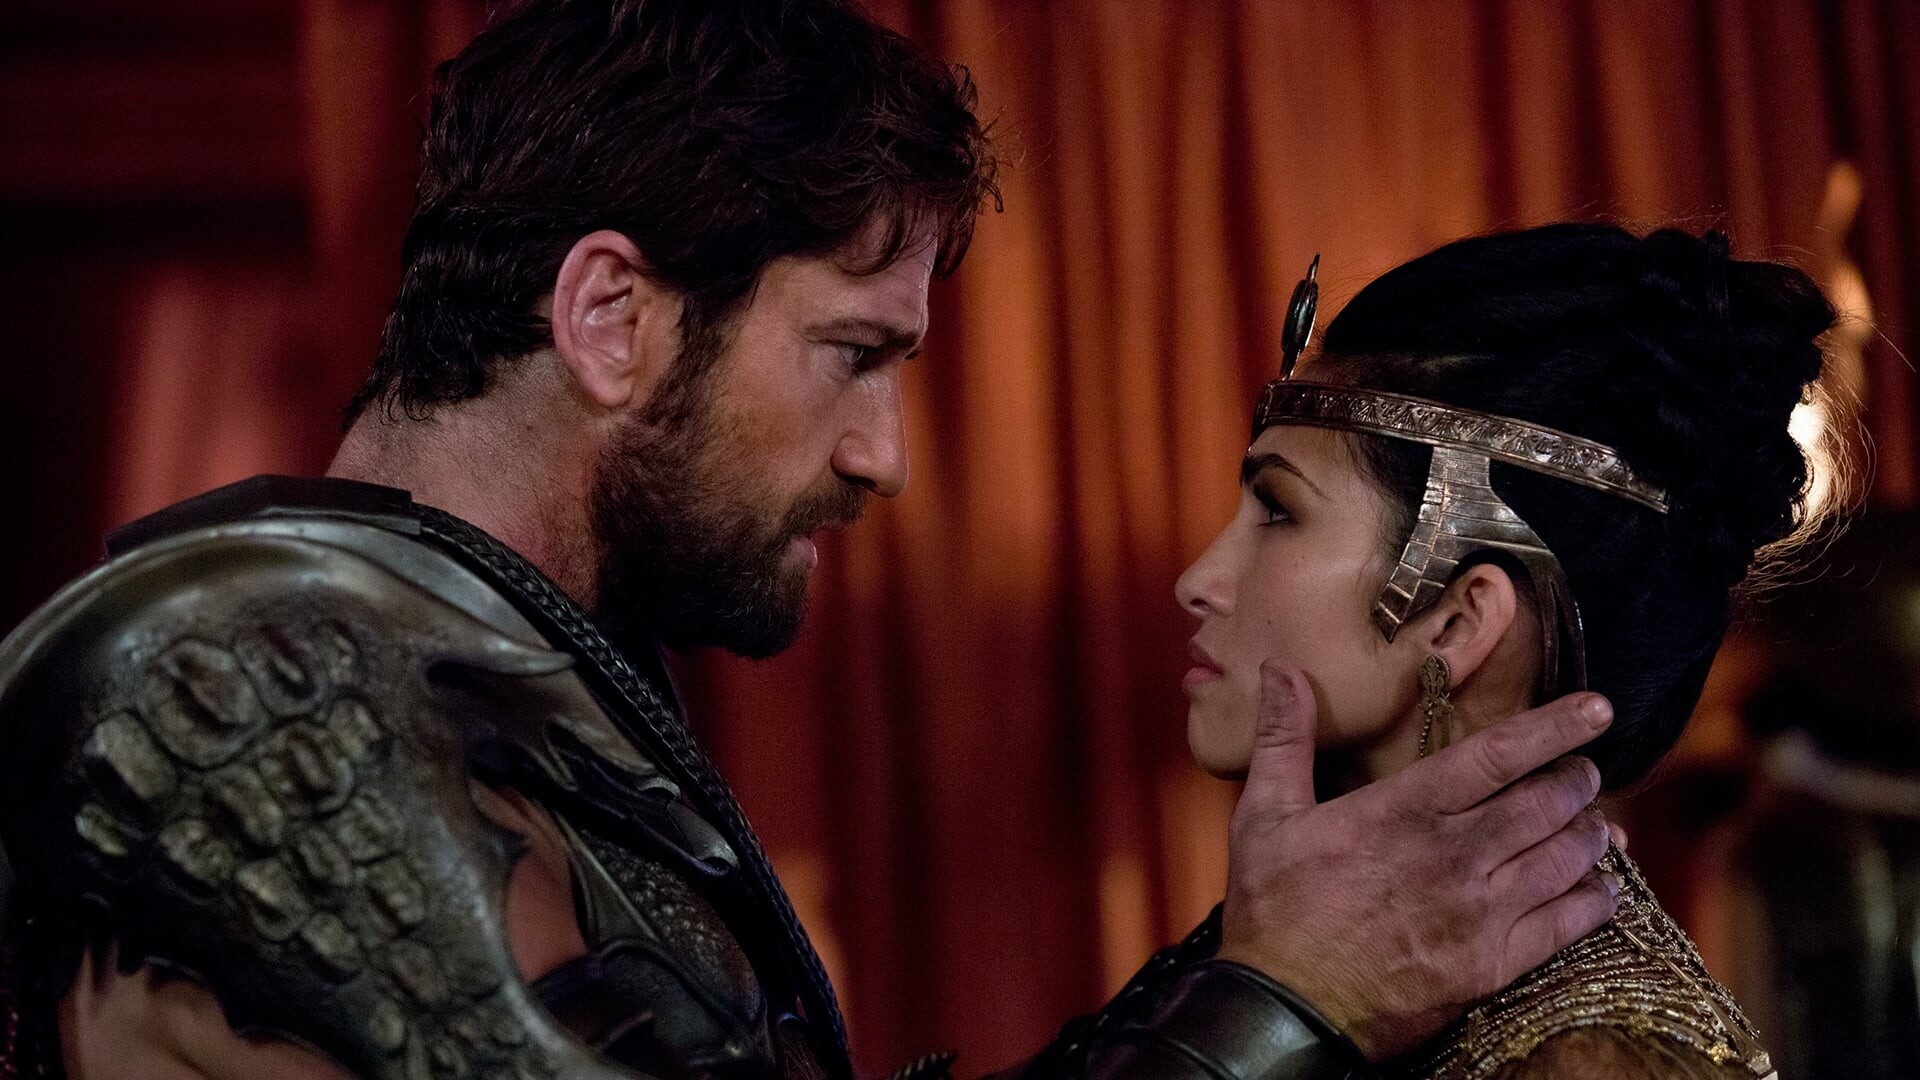 Gods of Egypt (Movie): Elodie Yung as Hathor, Gerard Butler as Set, The lord of darkness. 1920x1080 Full HD Background.